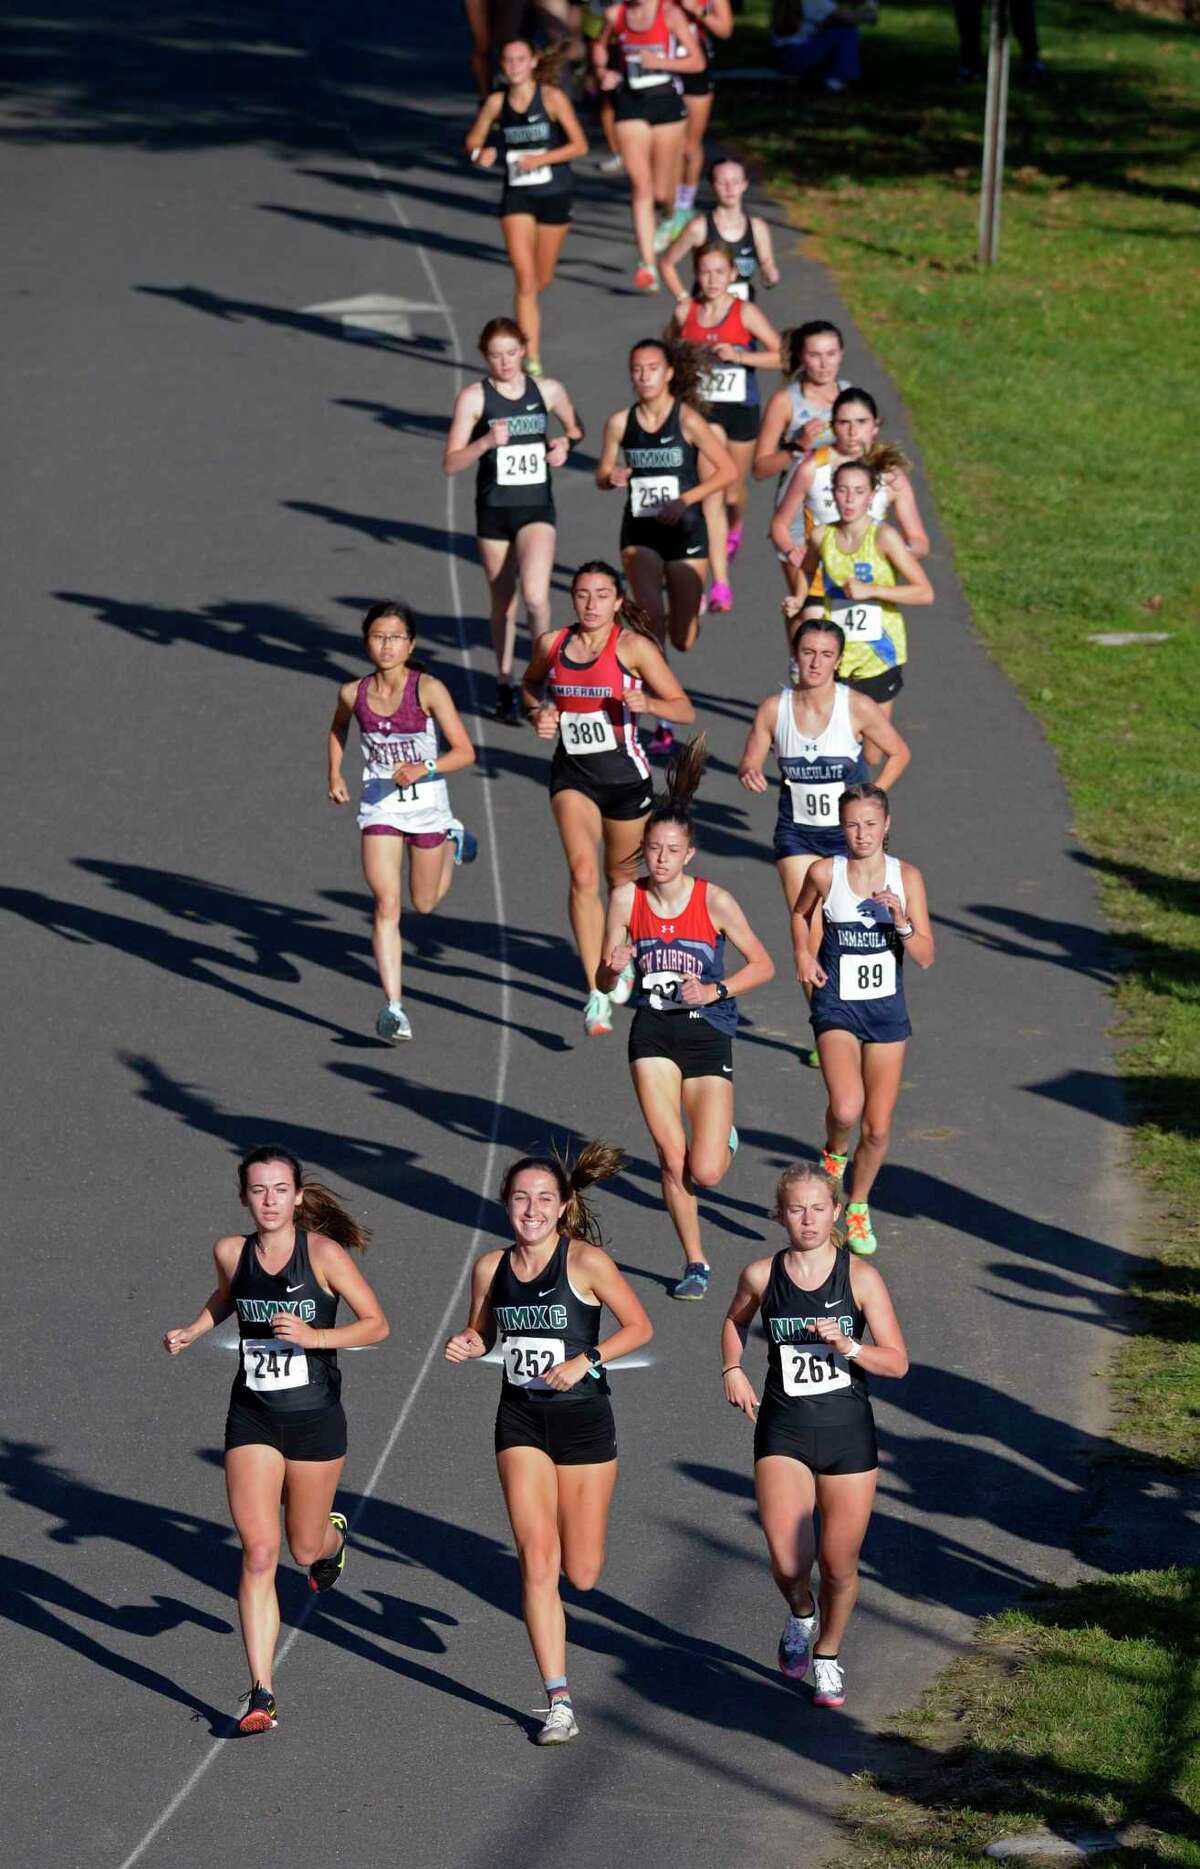 New Milford’s Claire Daniels (247), left, Sydney Kelleher (252) and Madelaine Sweeney (261) lead in the SWC girls varsity high school cross country championships on Oct. 20 at Bethel High School in Bethel.